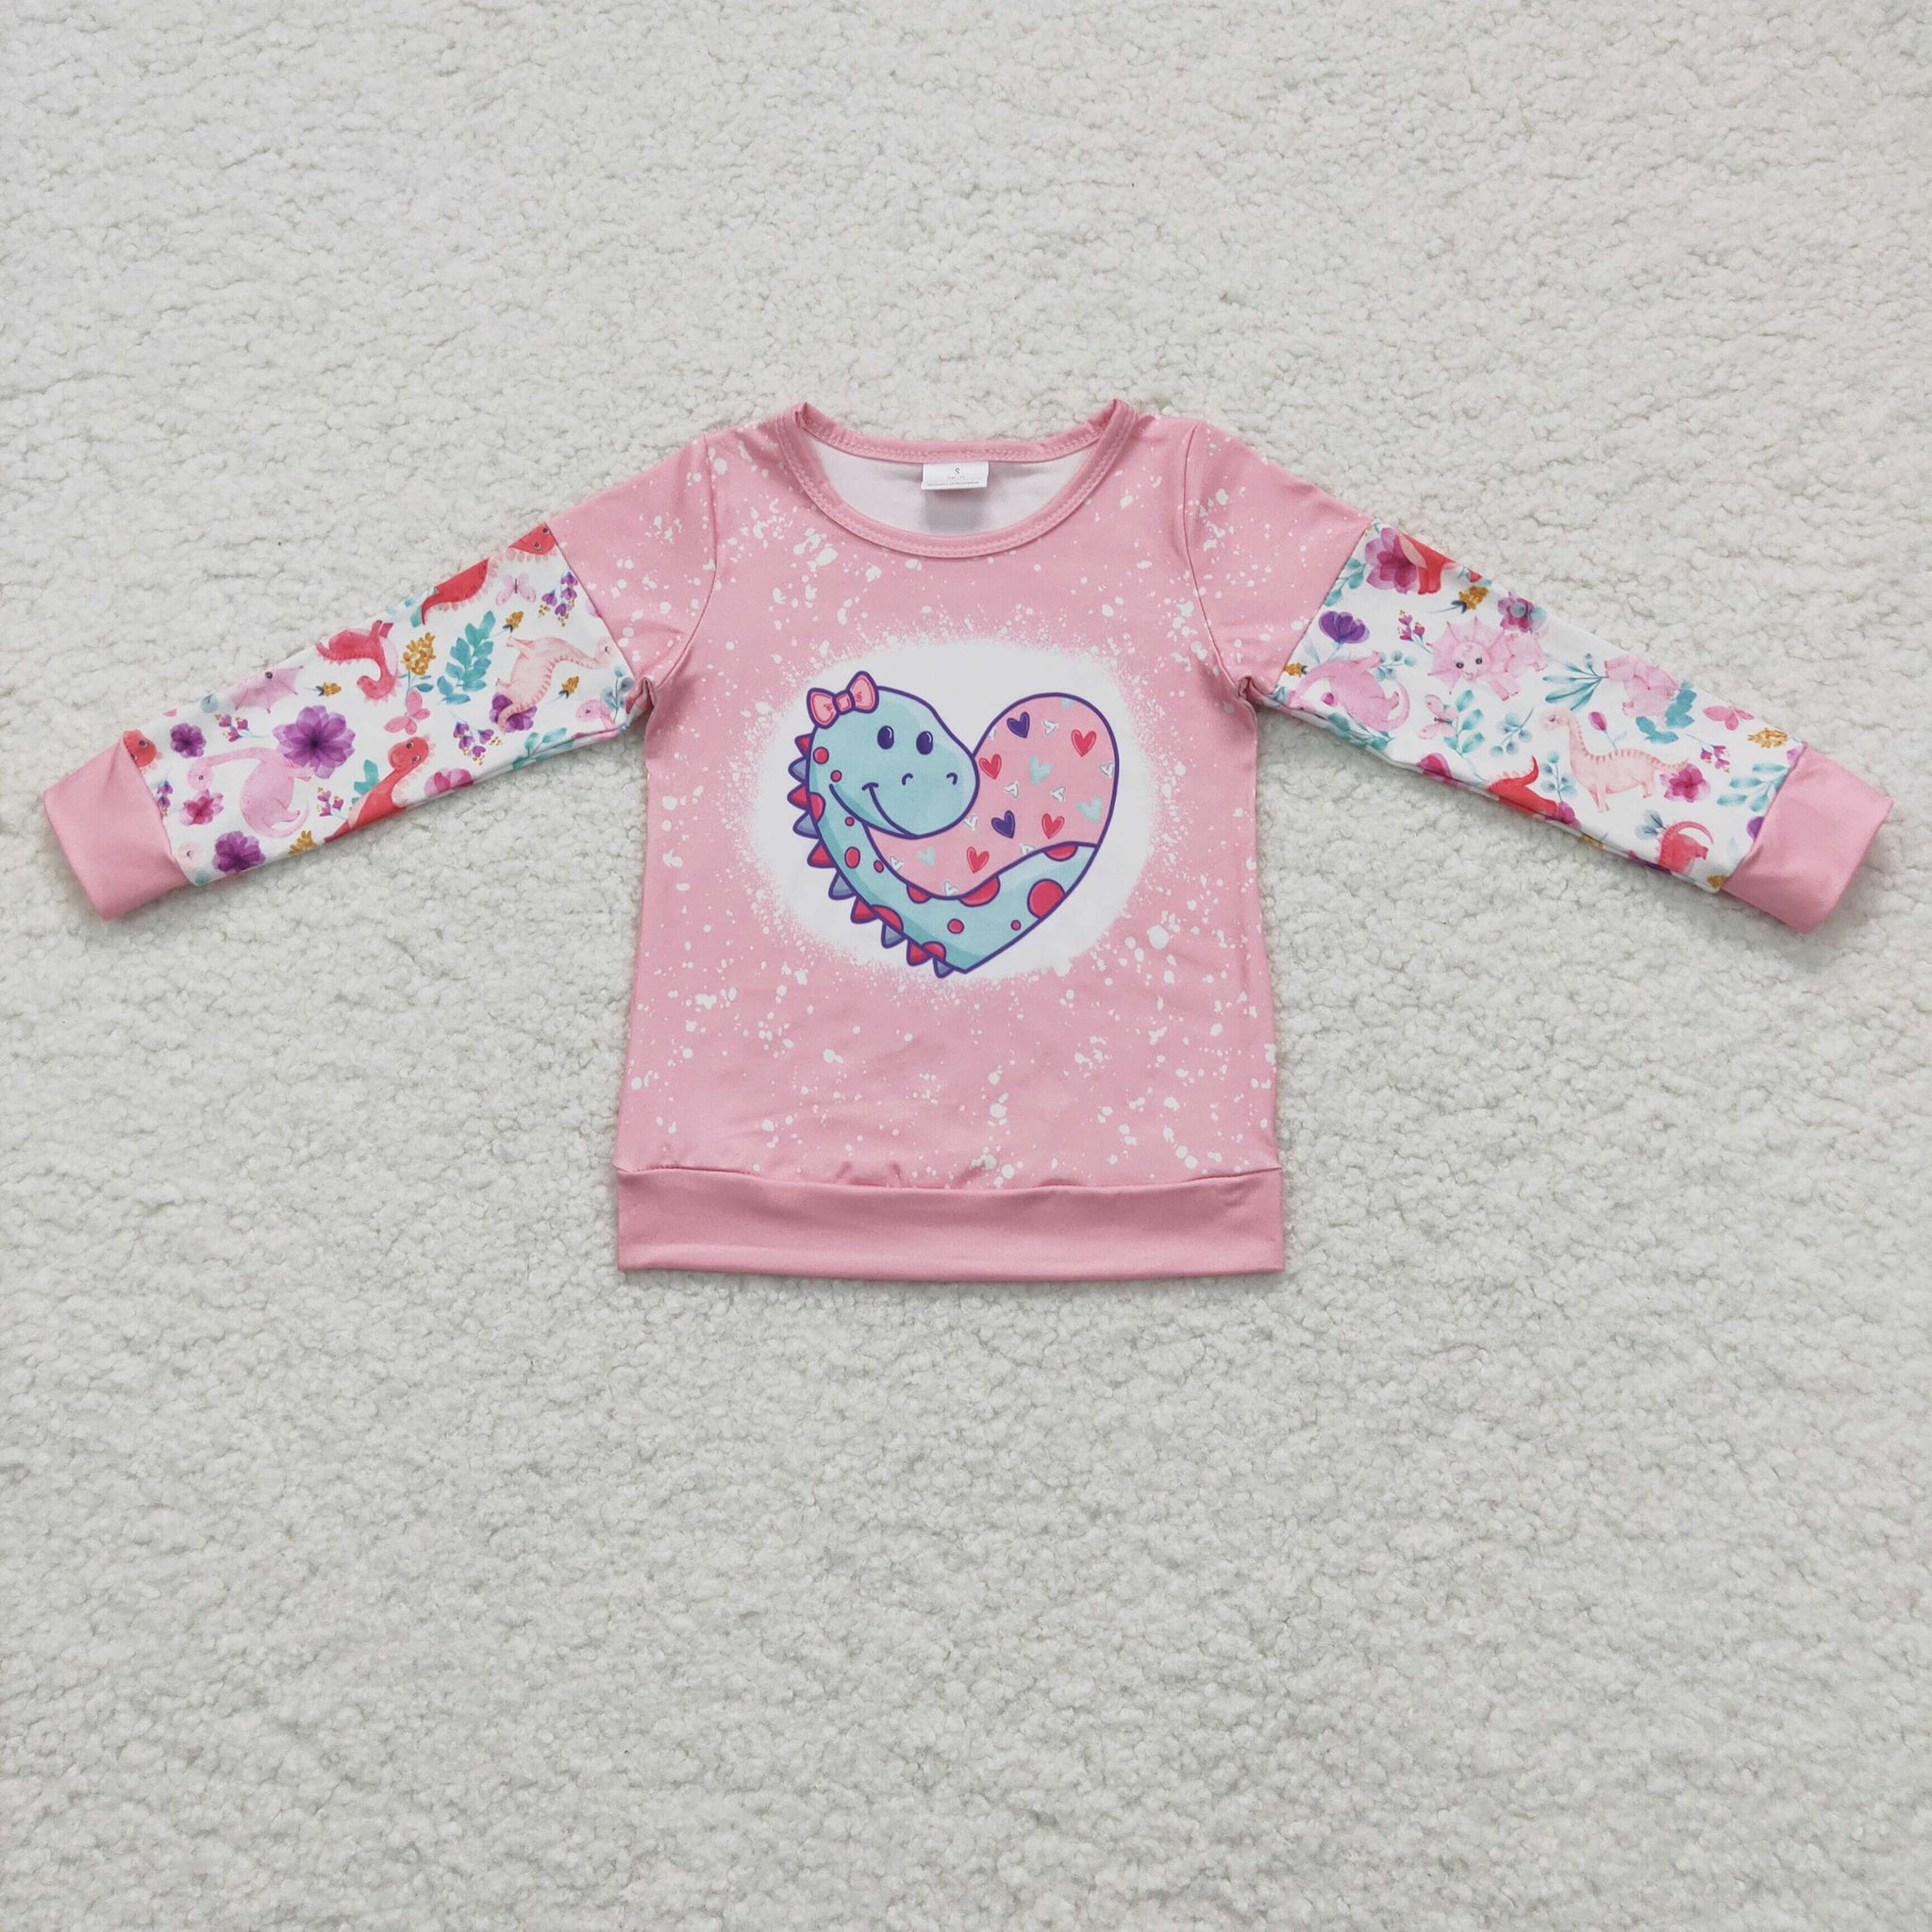 GT0087 baby girl clothes heart dinosaur valentines day shirt